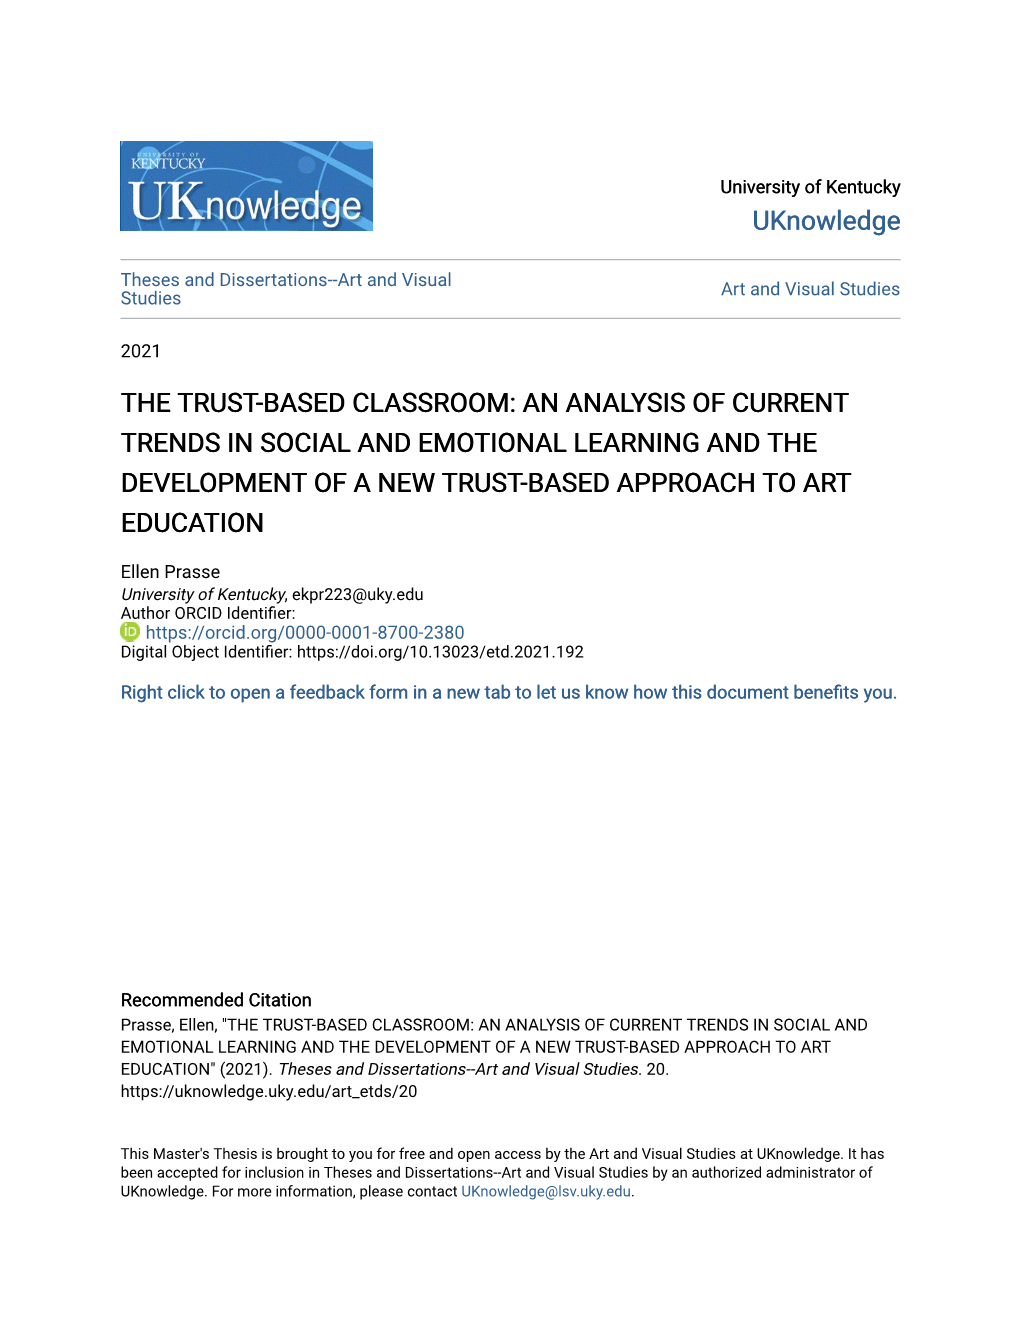 The Trust-Based Classroom: an Analysis of Current Trends in Social and Emotional Learning and the Development of a New Trust-Based Approach to Art Education